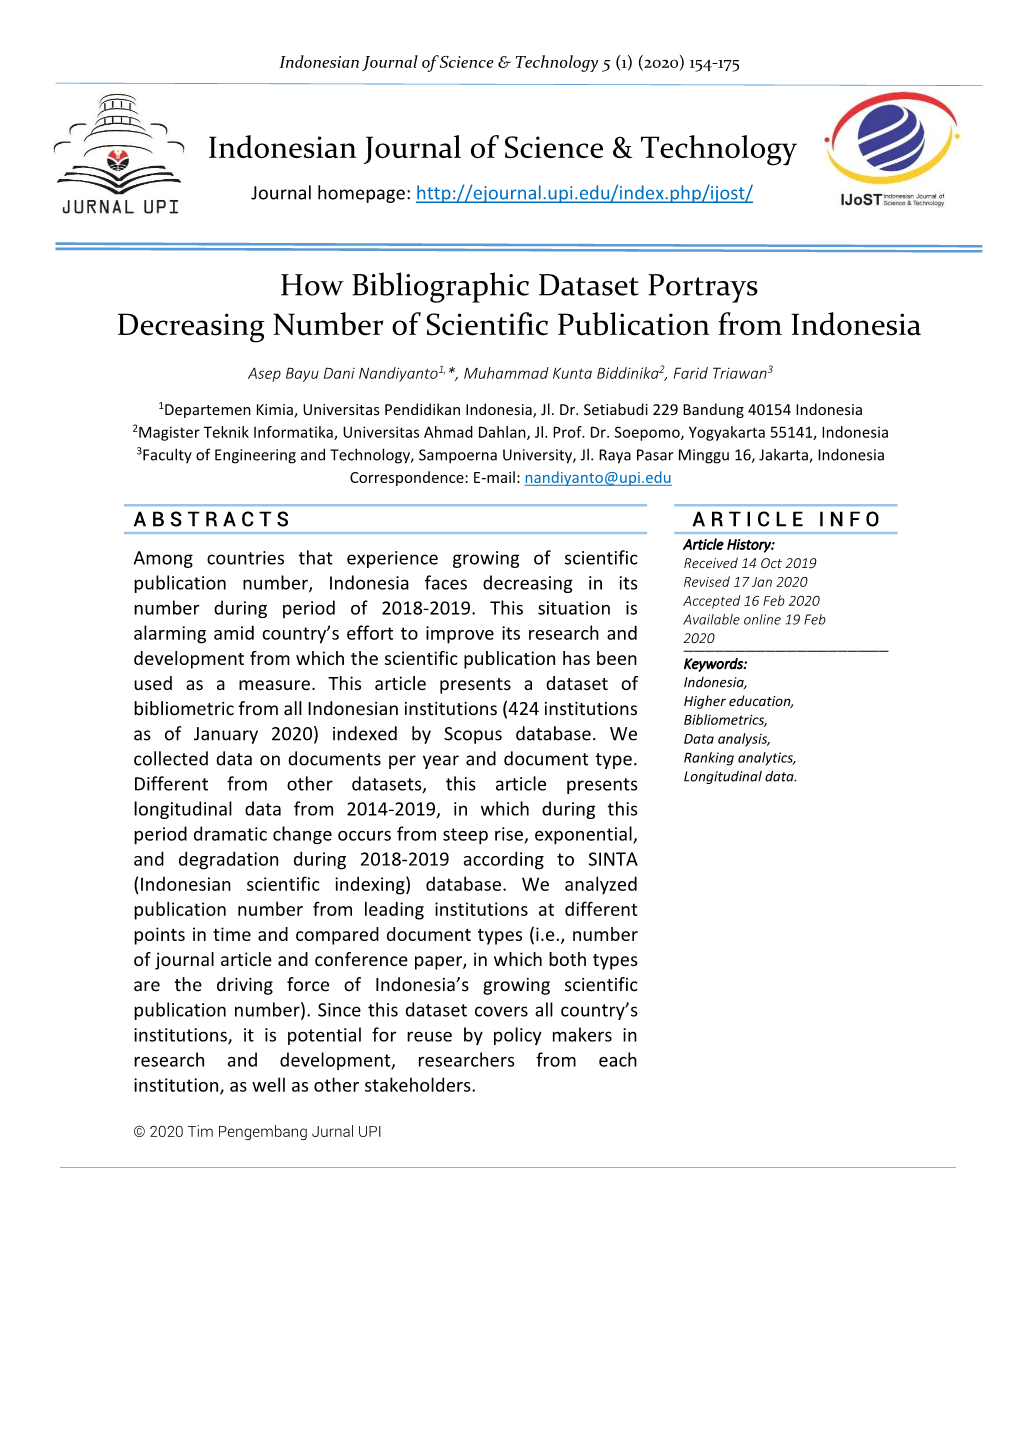 How Bibliographic Dataset Portrays Indonesian Journal of Science